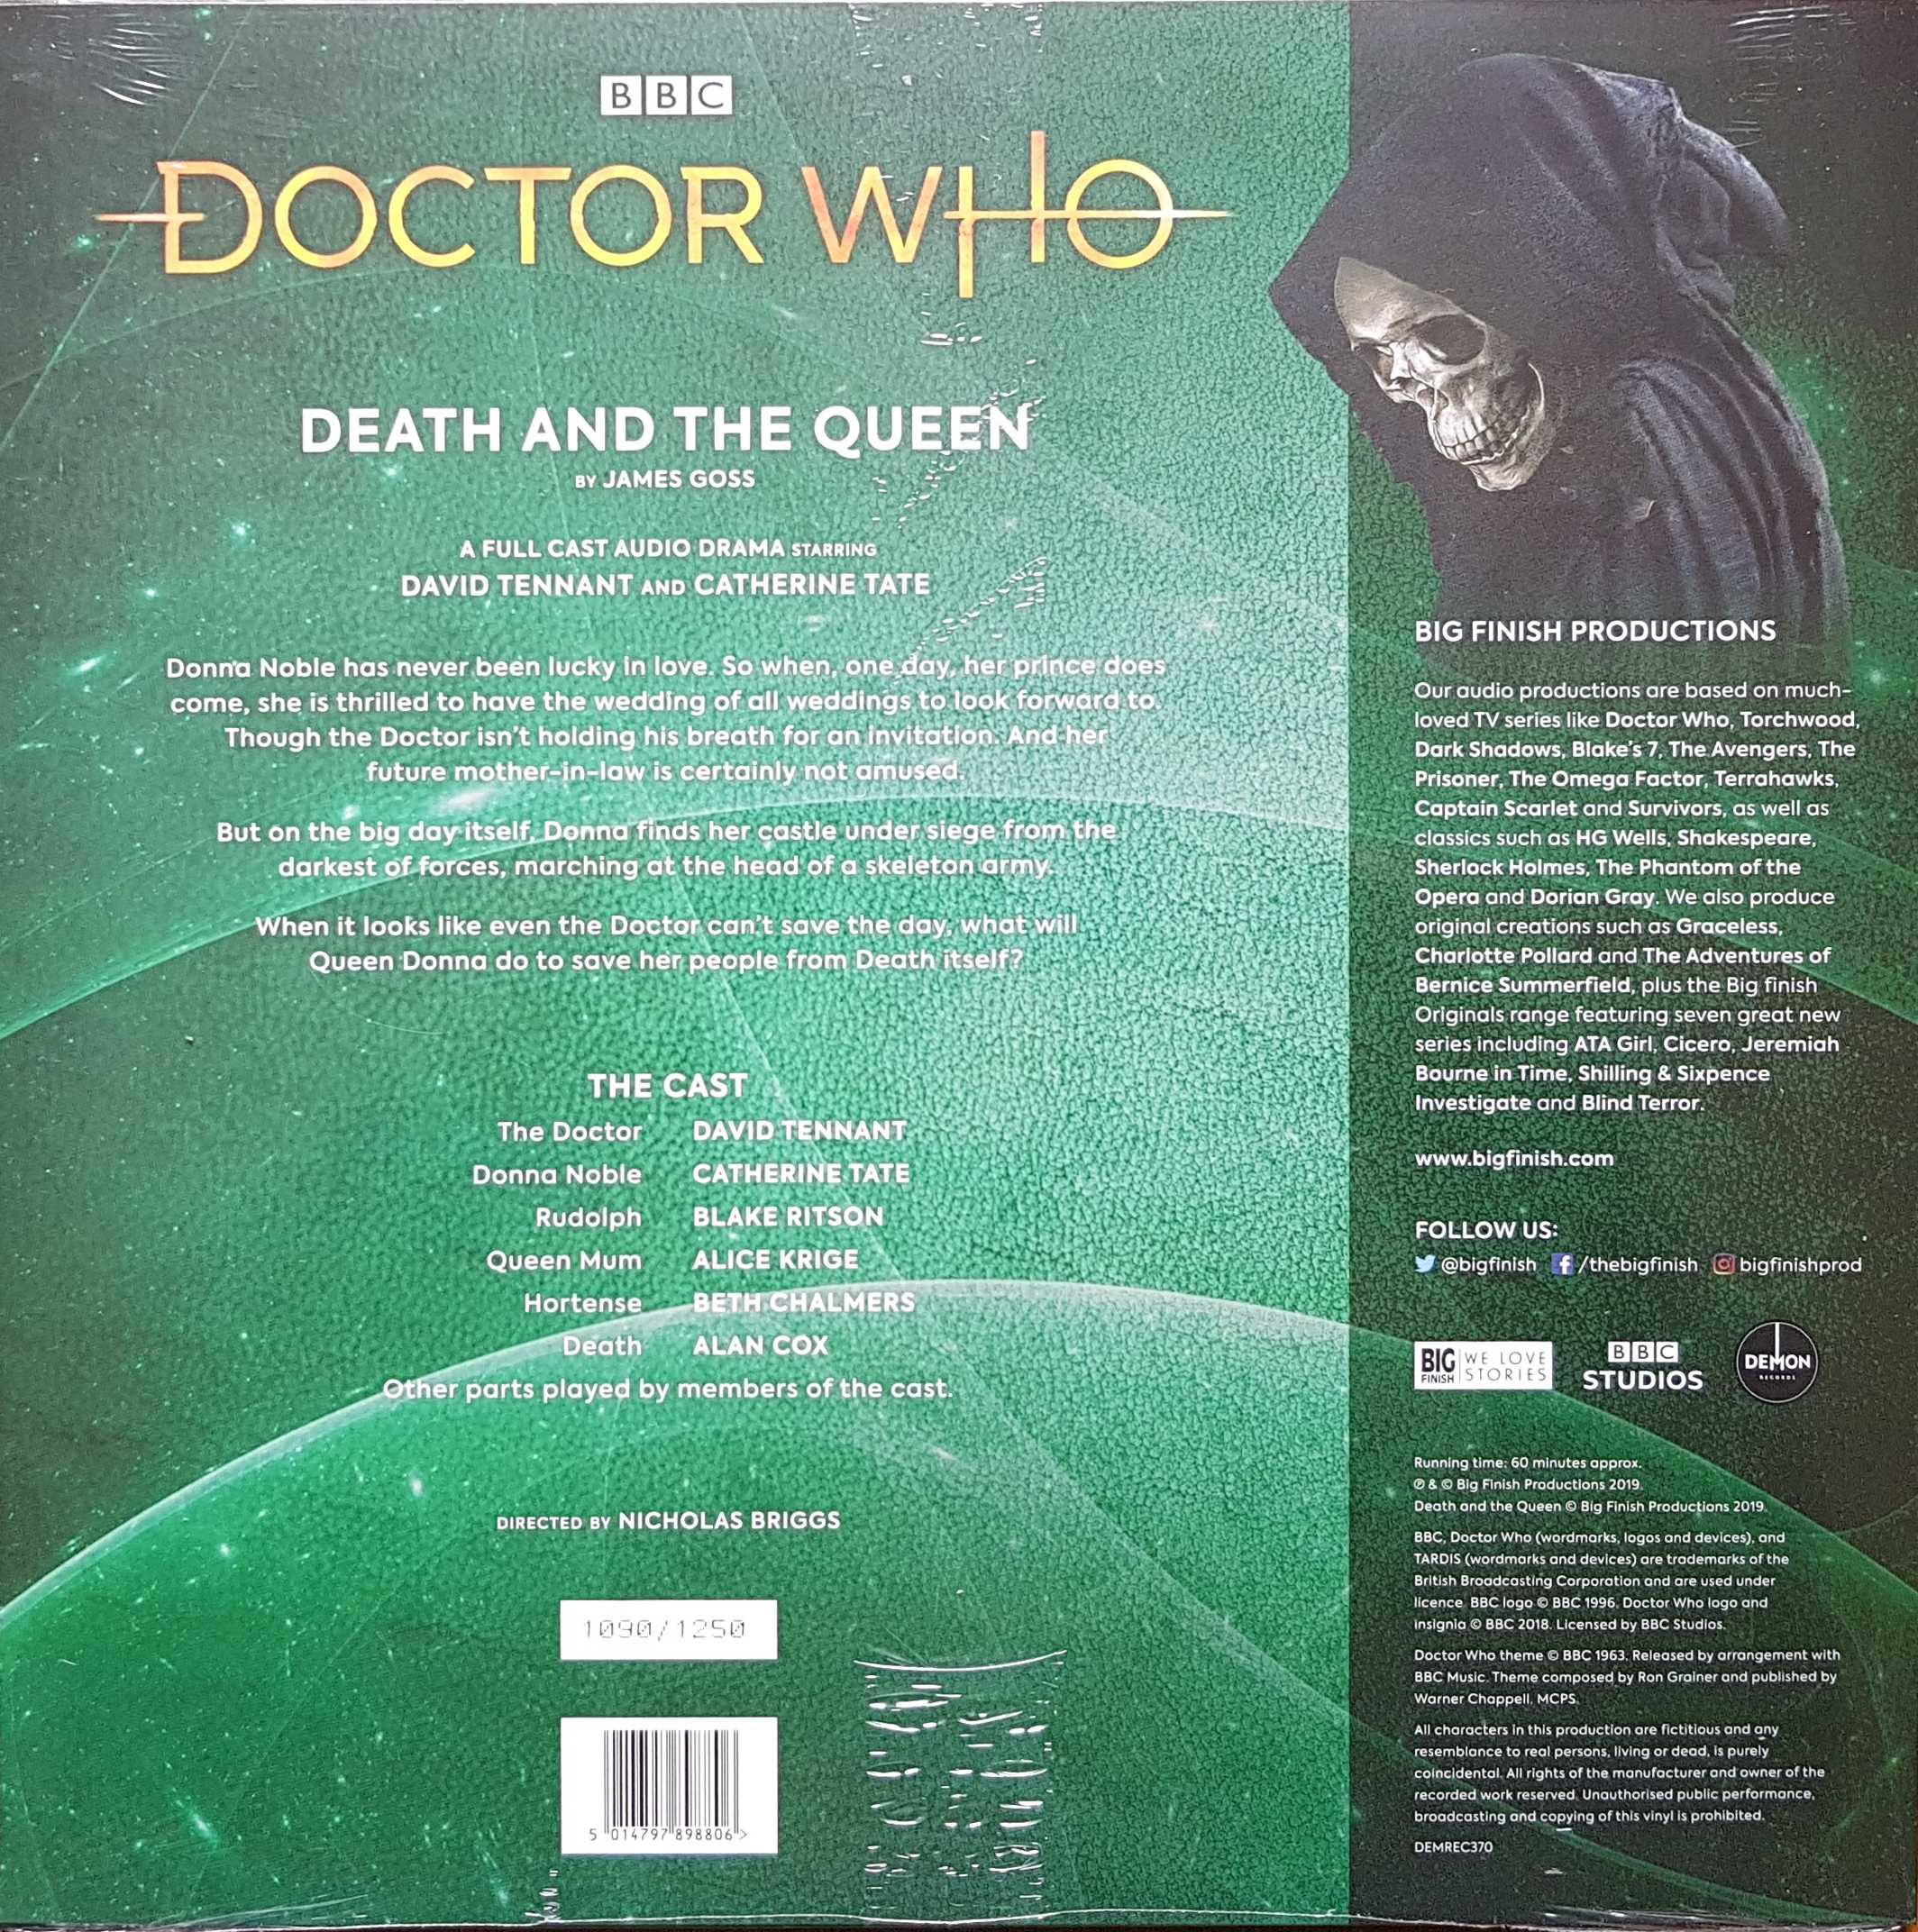 Picture of DEMREC 370 Doctor Who - Death and the Queen by artist James Goss from the BBC records and Tapes library